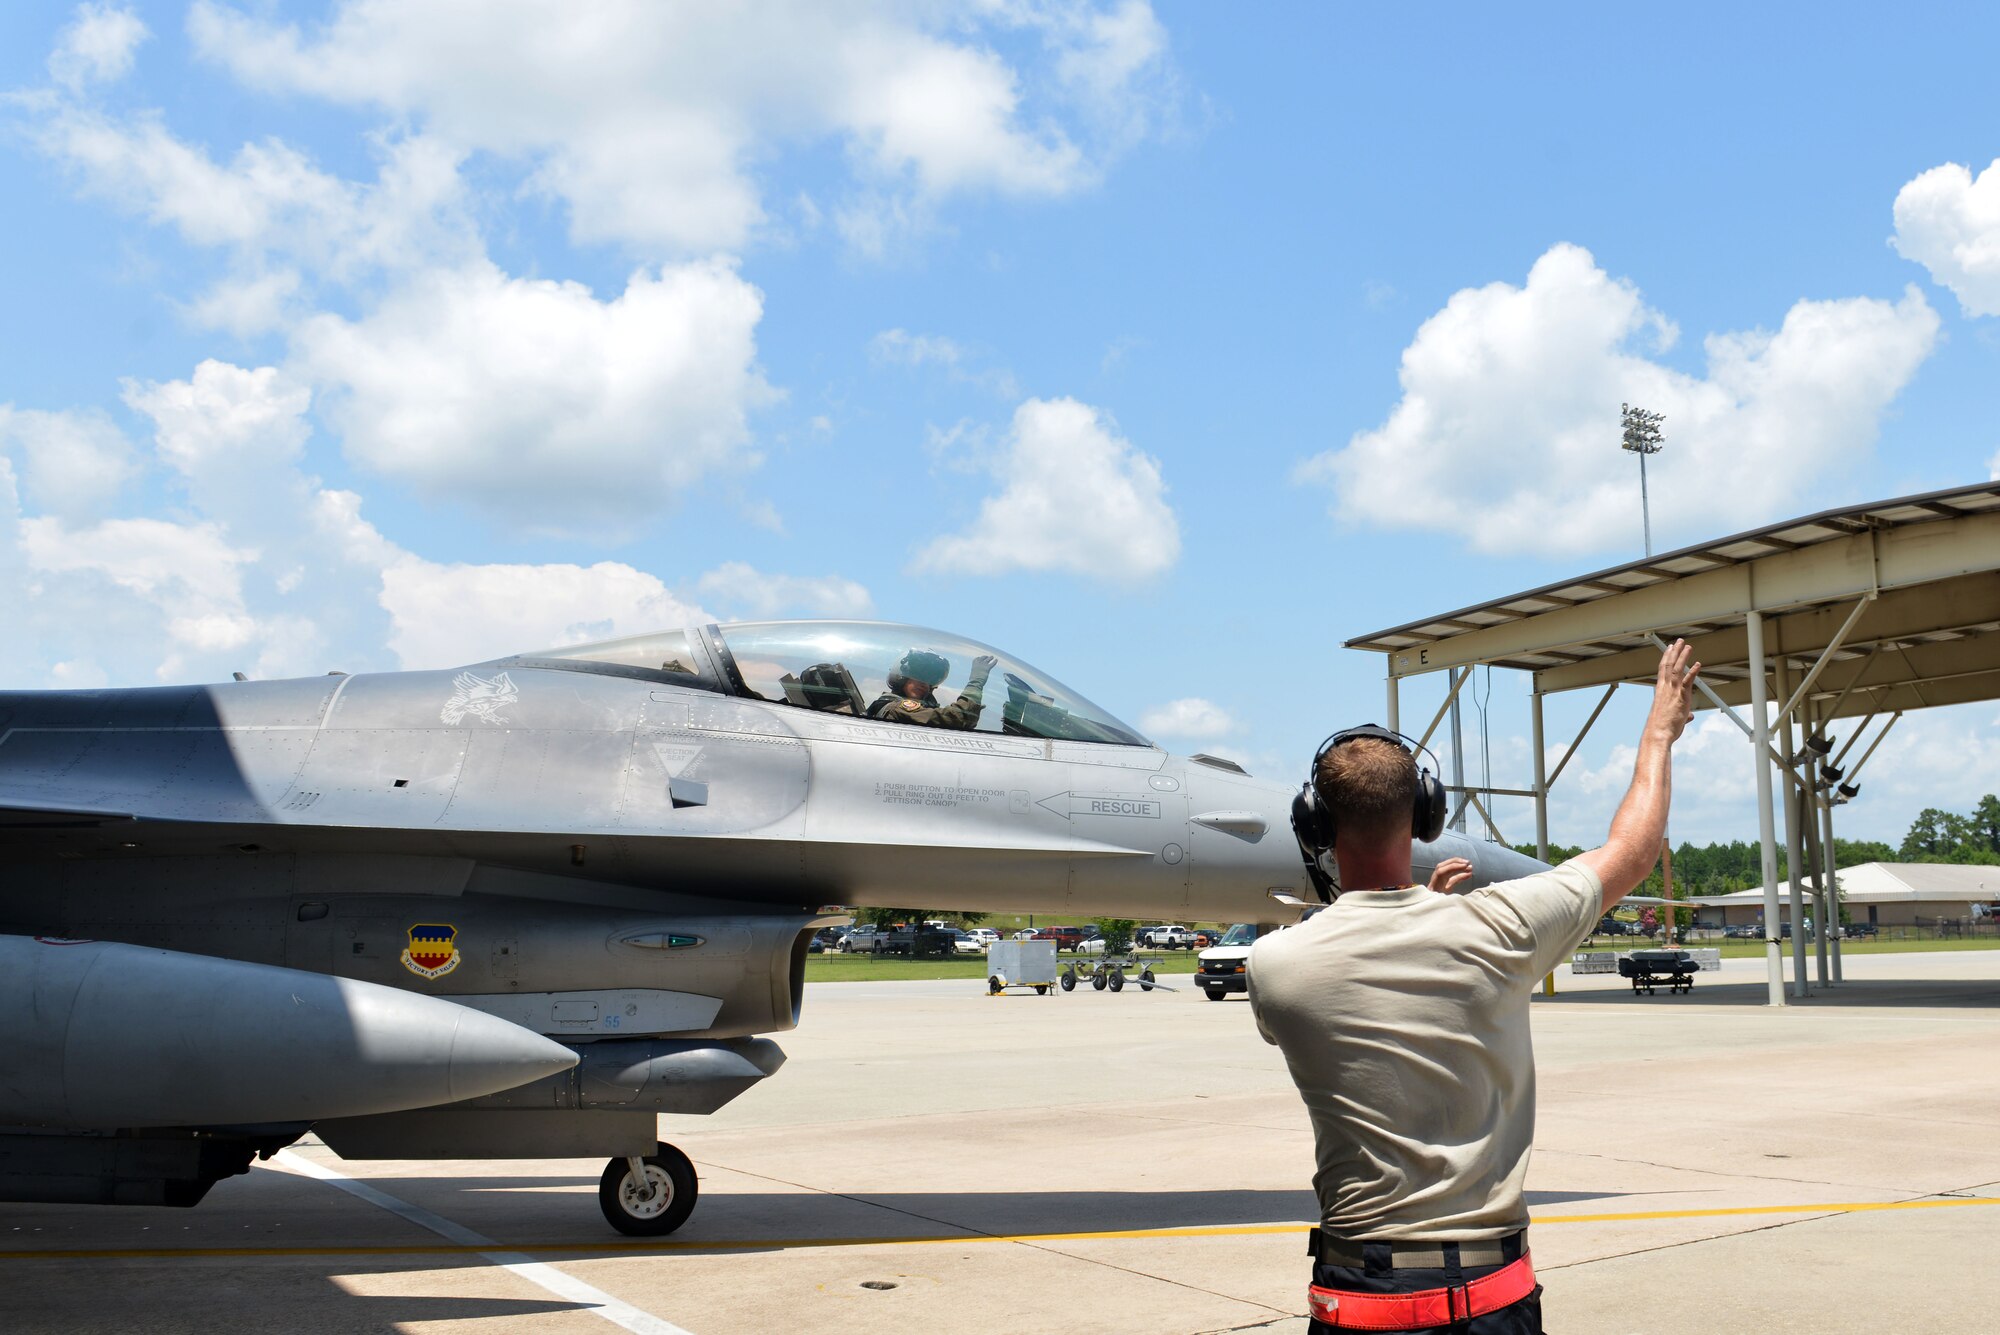 U.S. Air Force Senior Airman John Kelly, 20th Aircraft Maintenance Squadron tactical aircraft maintainer, makes the 79th Fighter Squadron, “Tigers,” hand signal while marshalling out an F-16CM Fighting Falcon at Shaw Air Force Base, S.C., July 19, 2017. The 79th FS is one of three fighter squadrons under the 20th Fighter Wing which provide the suppression of enemy air defenses. (U.S. Air Force photo by Airman 1st Class Destinee Sweeney)